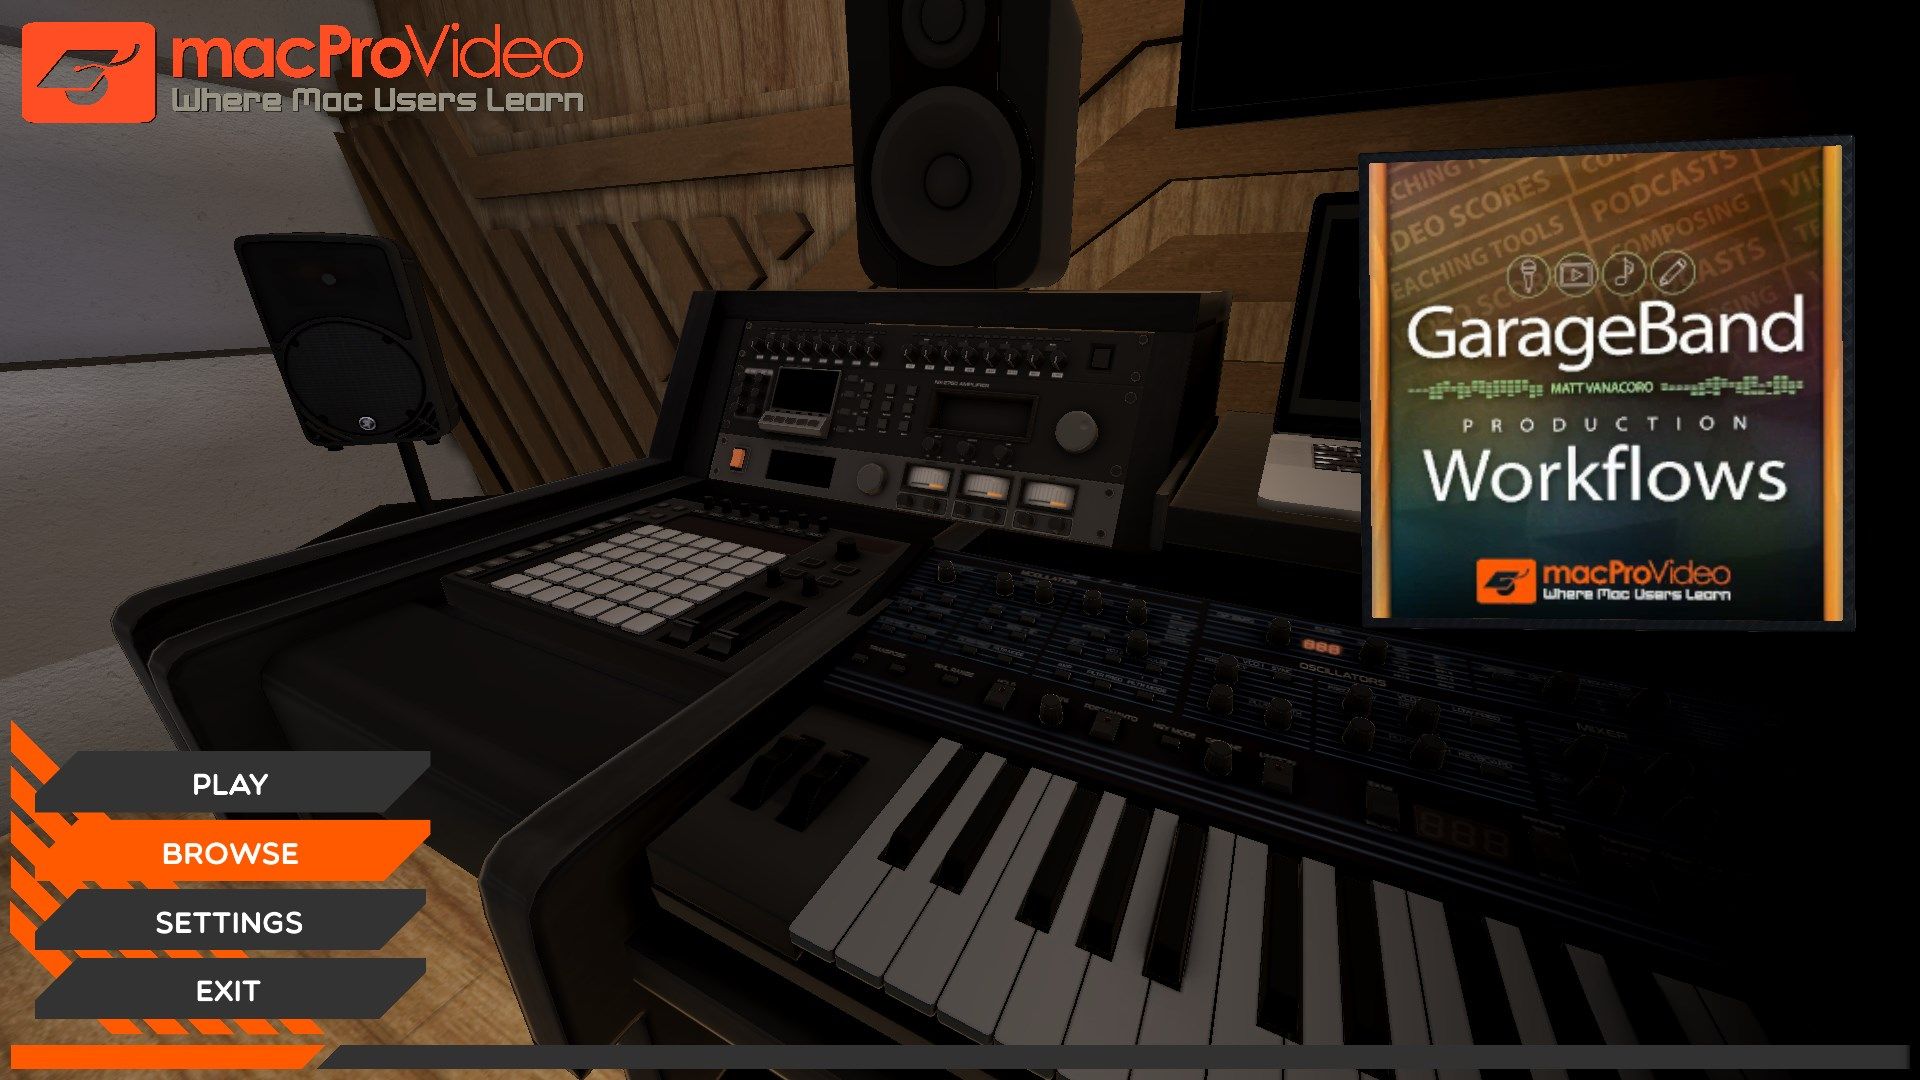 Workflows Guide For GarageBand by mPV